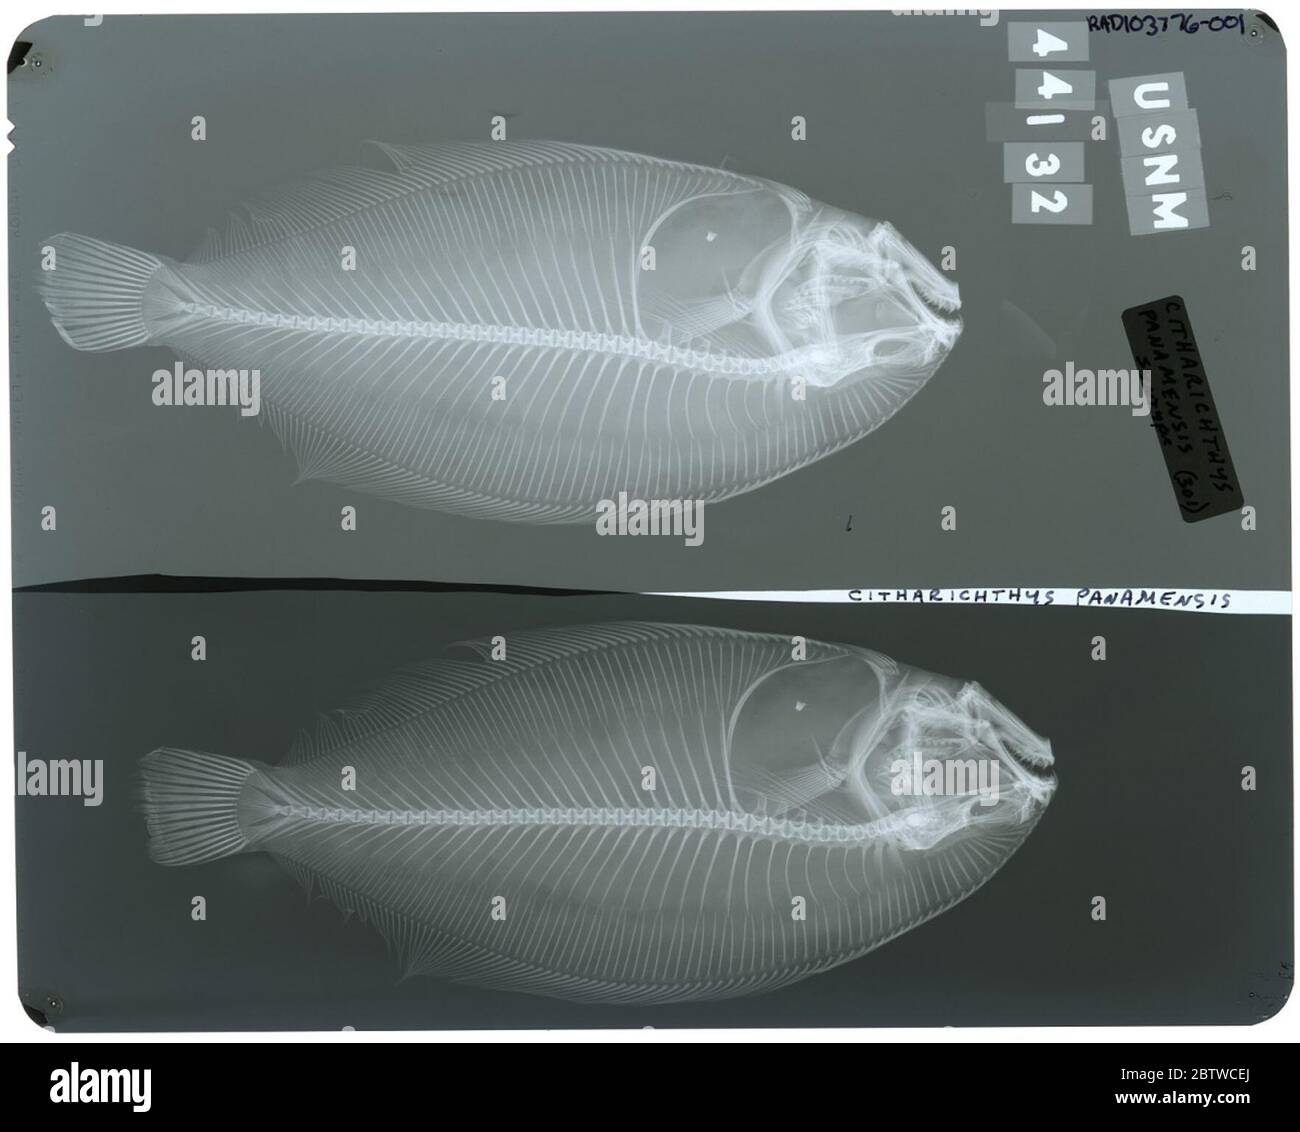 Citharichthys panamensis Steindachner. Radiograph is of a syntype; The Smithsonian NMNH Division of Fishes uses the convention of maintaining the original species name for type specimens designated at the time of description. The currently accepted name for this species is Cyclopsetta panamensis.25 Oct 20181 Stock Photo